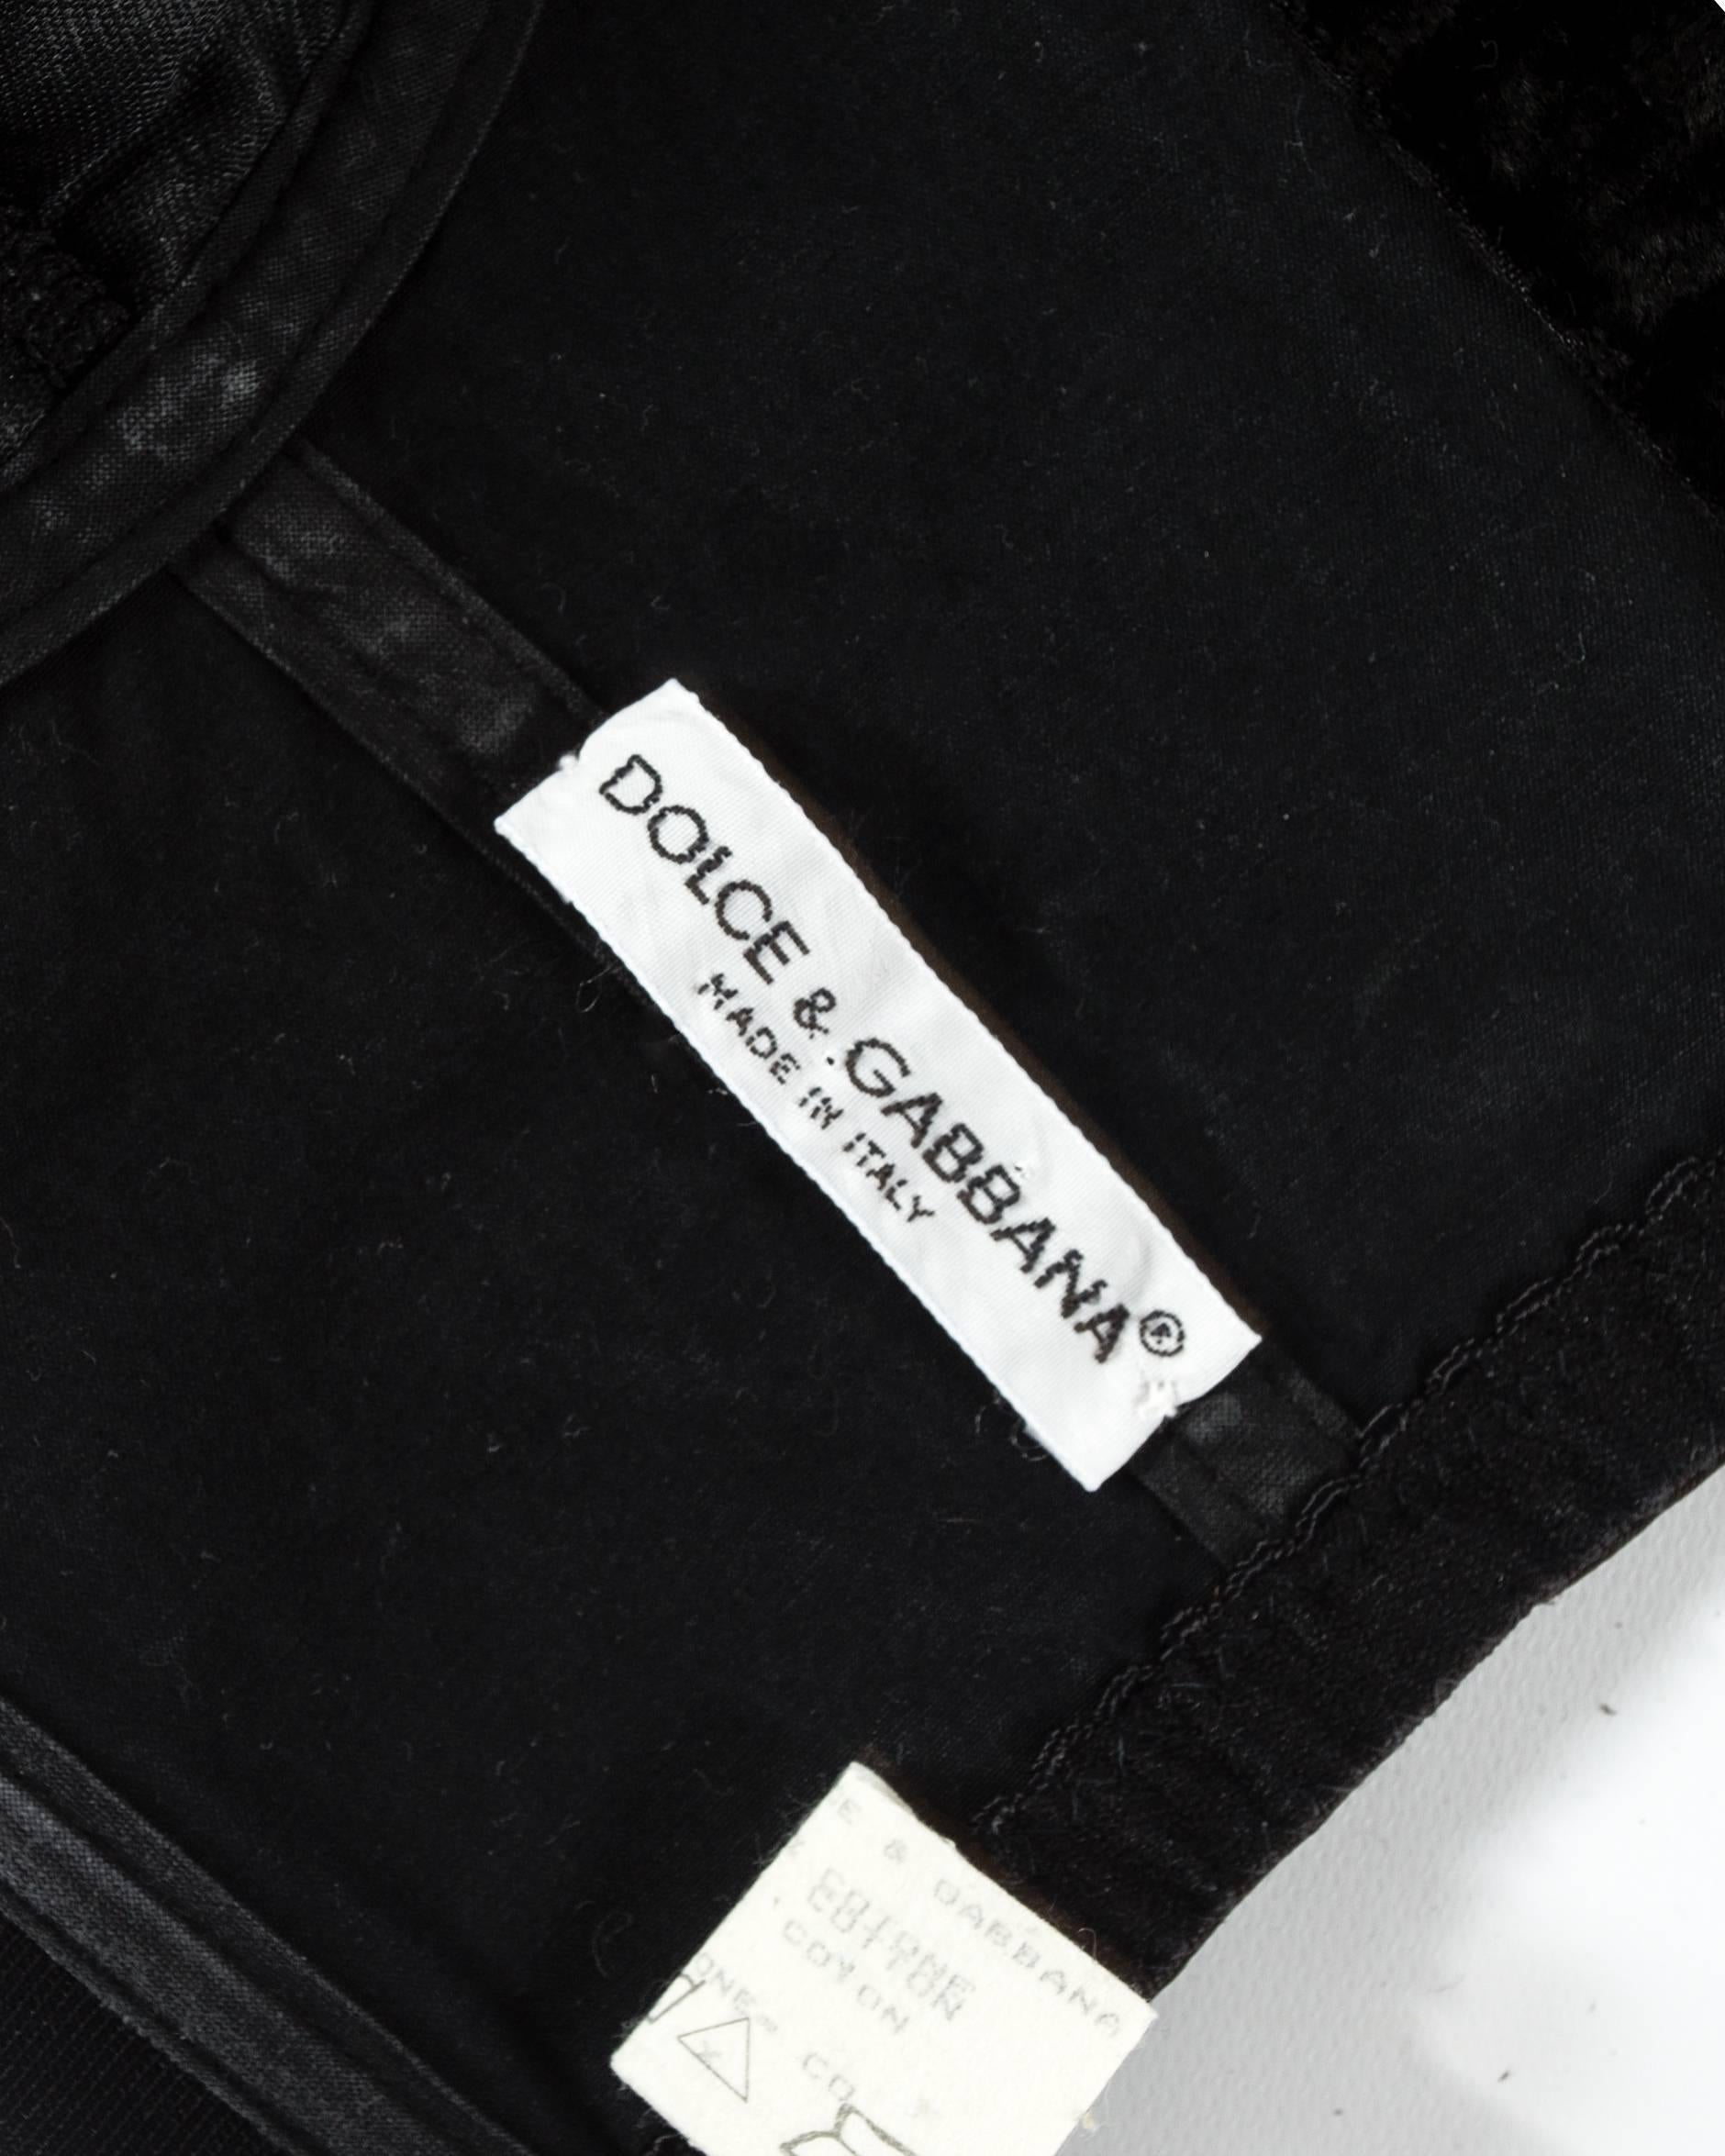 Women's Dolce & Gabbana black satin and lycra corset with attached white shirt, aw 1992